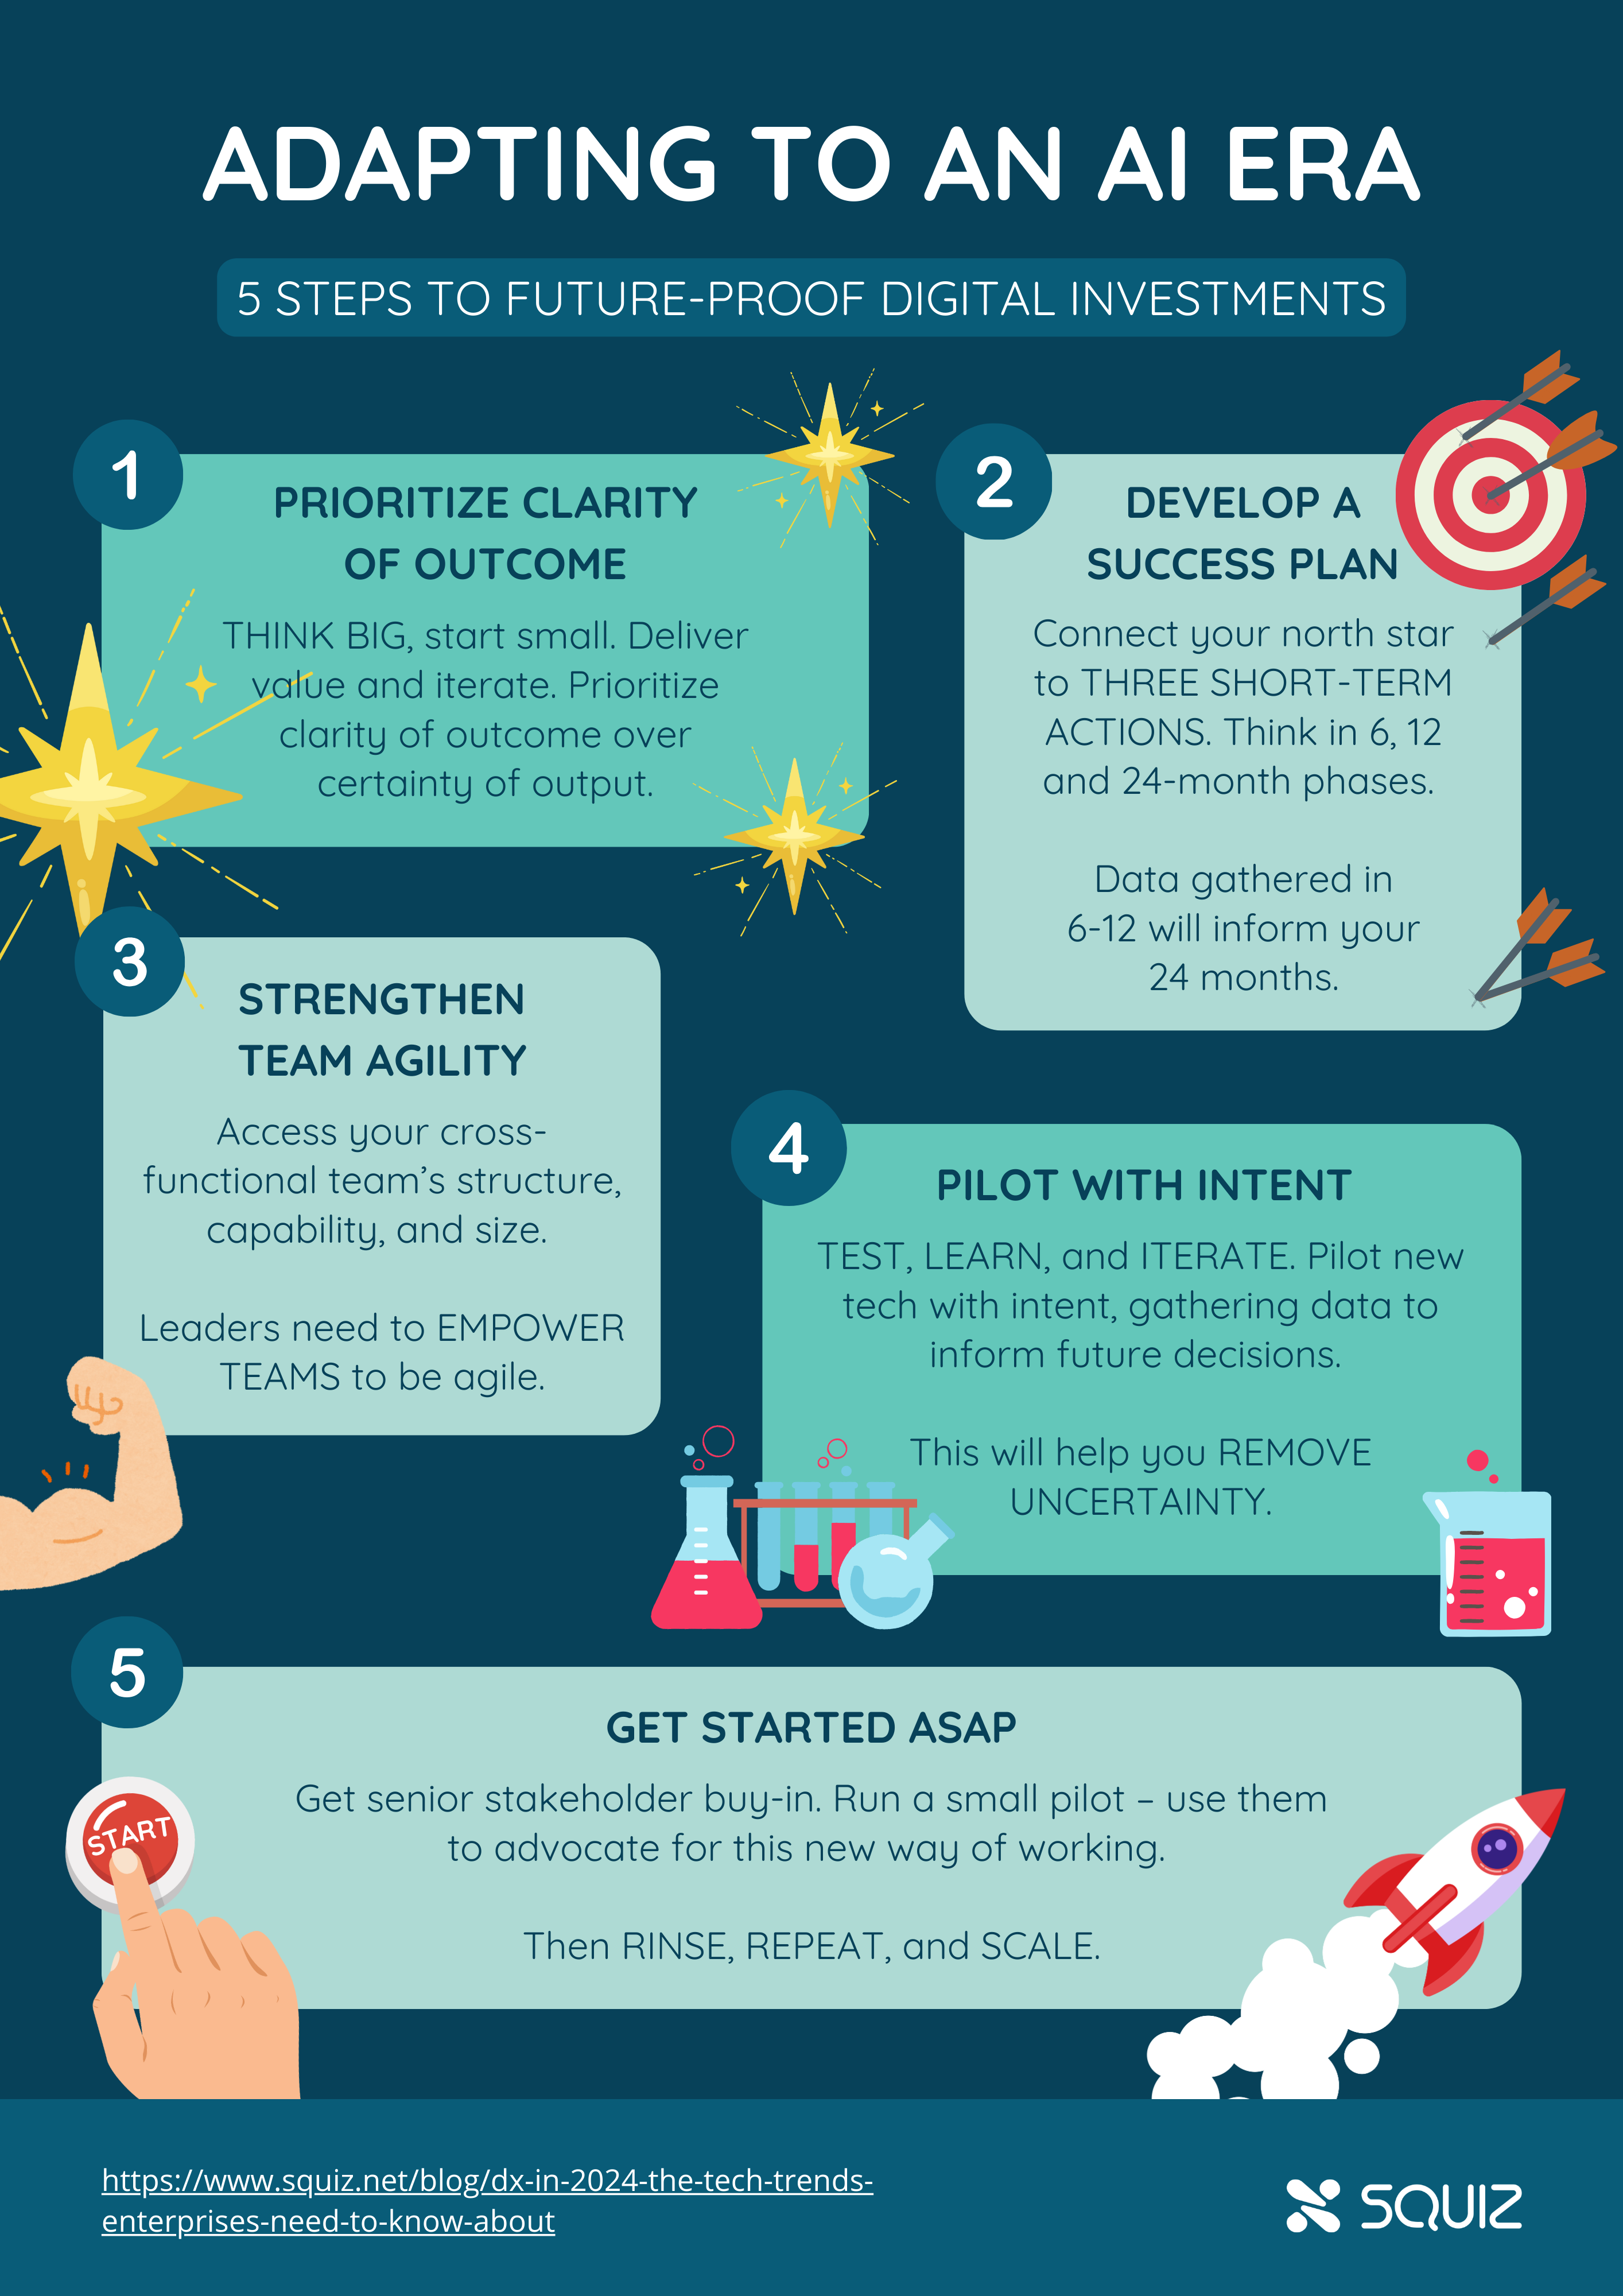 An infographic that summarizes this blog content into five actionable steps. Adapt your long-term strategy – move from long-term plans to an iterative approach that allows for change. ‘Clarity of outcome rather than certainty of output.’ Use a success plan methodology to get started.Measure team agility – embrace agility in both culture and strategy. You need to assess your team’s ability to be agile – consider if you’re empowering them to do so e.g. the structure, capability, and way they work.Also, allow your strategy to be agile. Consider your architecture, governance, and content orchestration.Get started – get your stakeholders on board with a simple pilot program. Find your internal champion and get them to advocate for this new way of working. People need to see it to believe it!Pilot with intent – break out of the cycle of endless experimentation without practical application. Consider why you need to pilot that tech – will it help you be more agile? Then, use the data from the pilot to inform your future pilots.